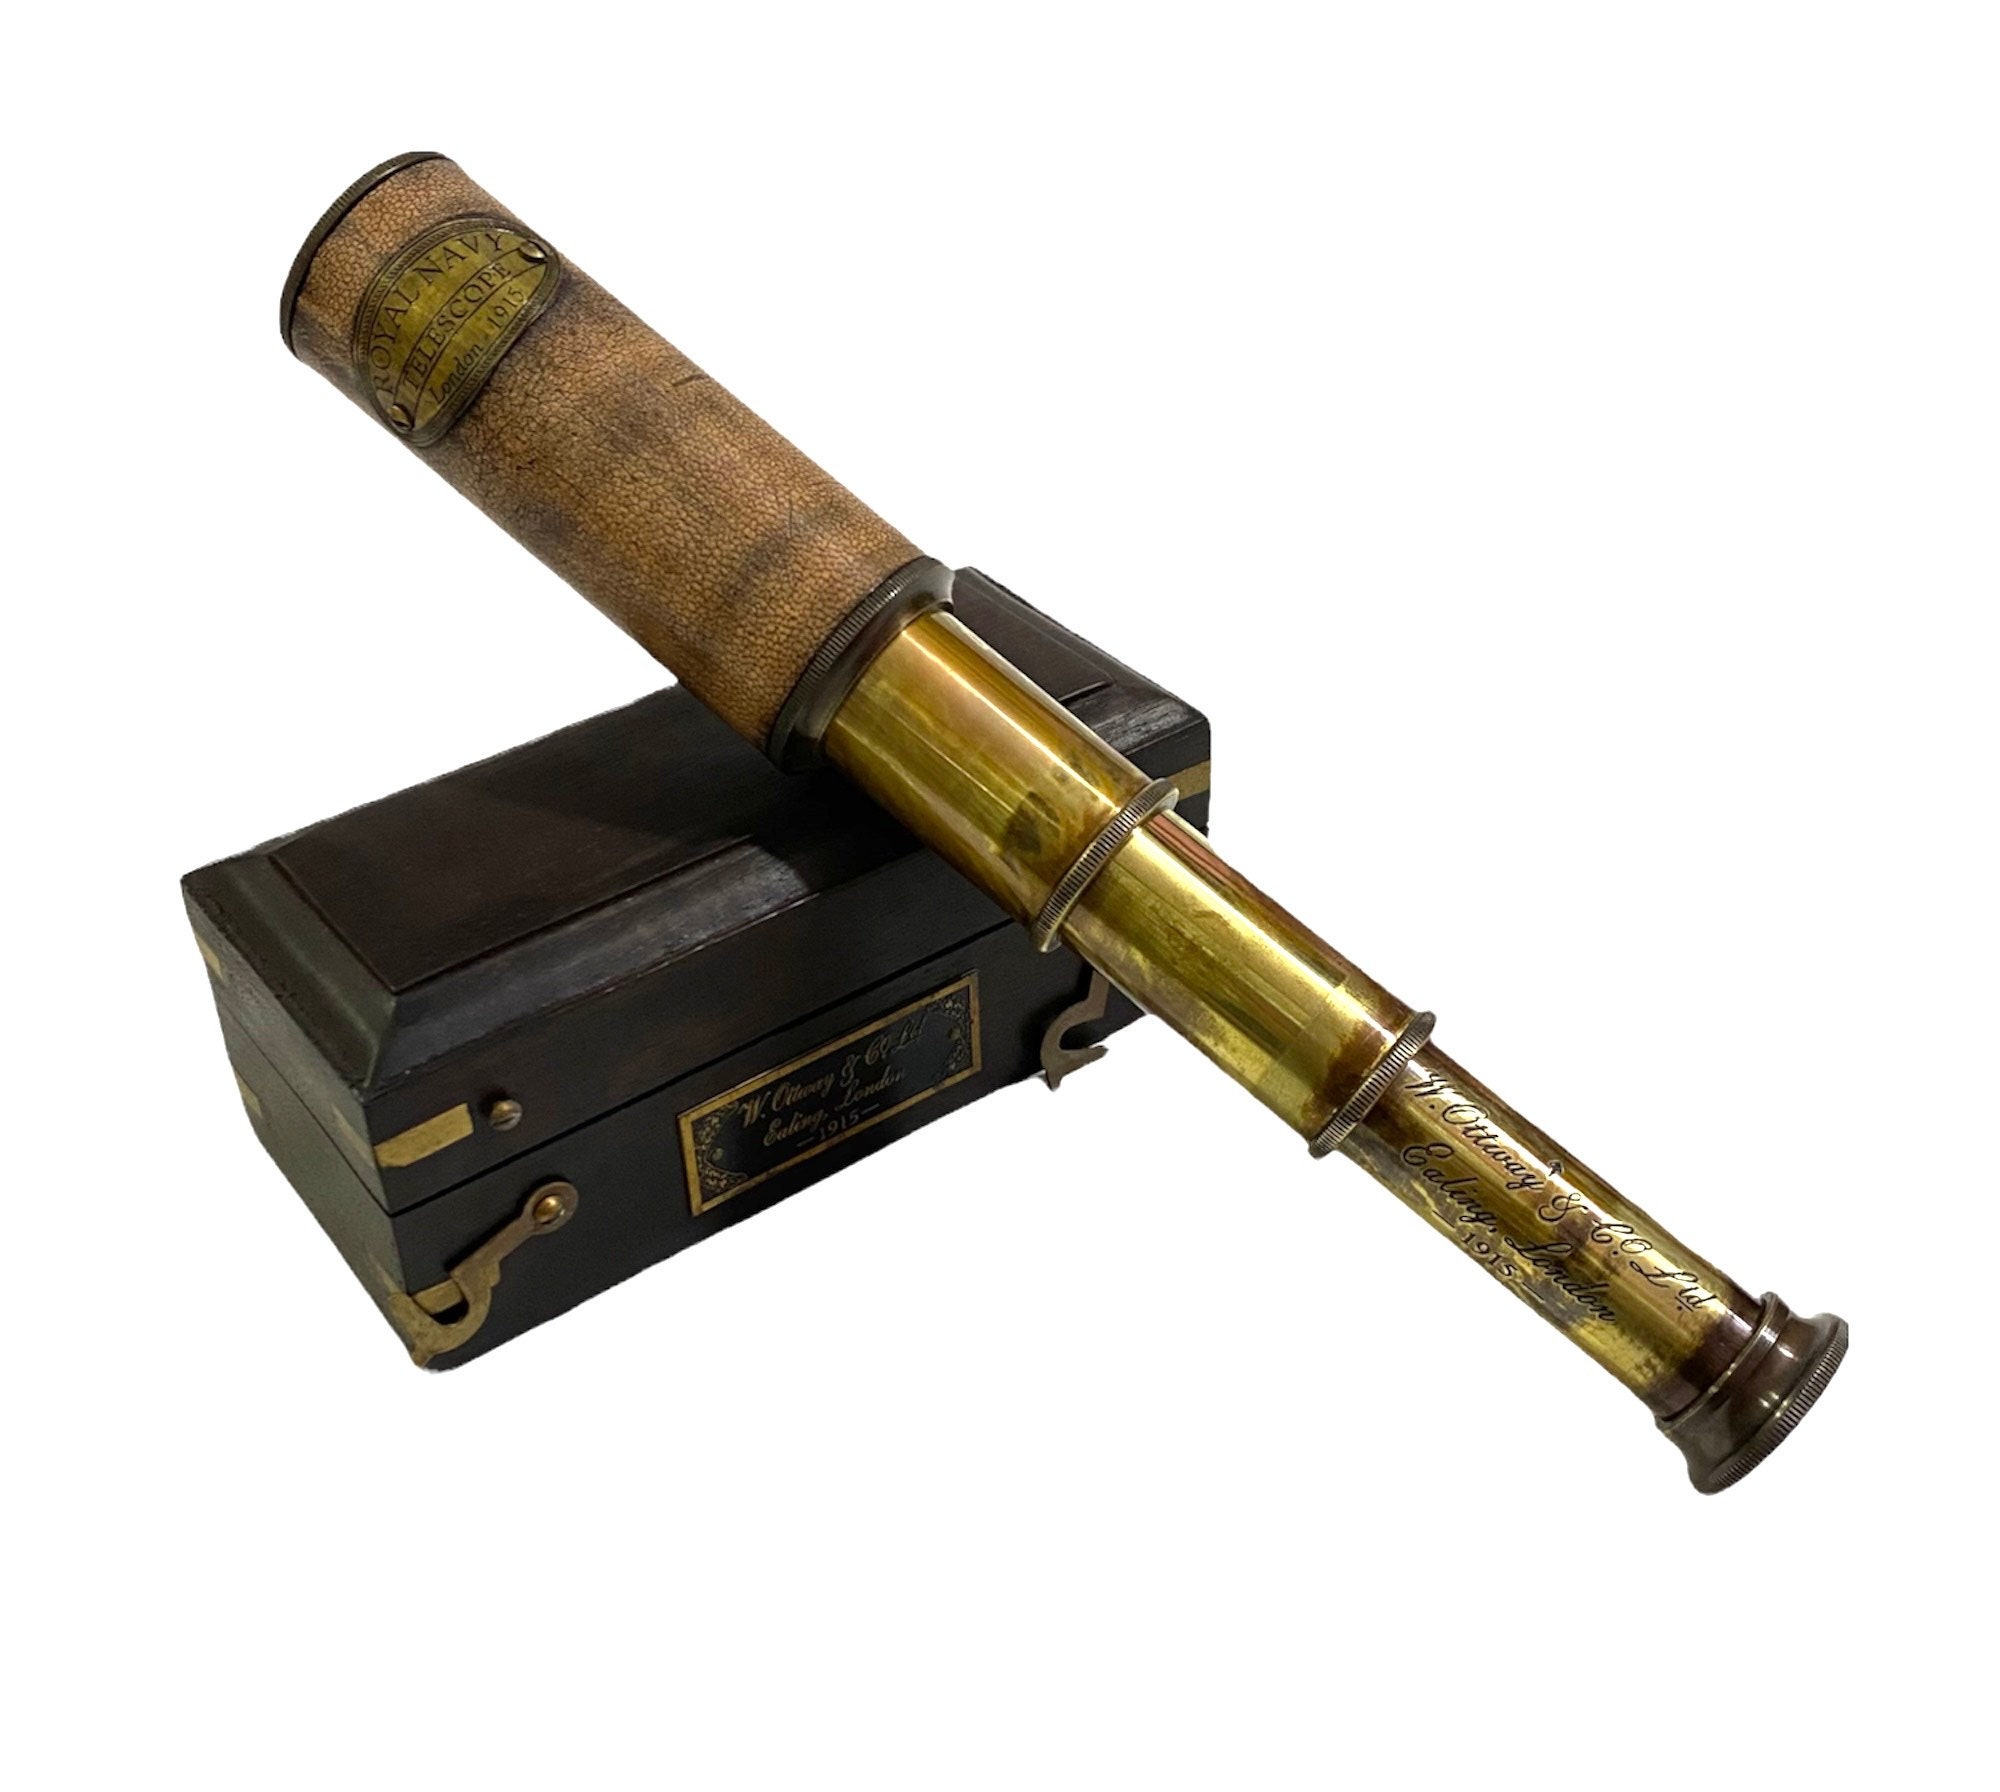 Details about   Brass Handle Mini Telescope Royal Navy London 1915 With Wooden Box Free Shipping 